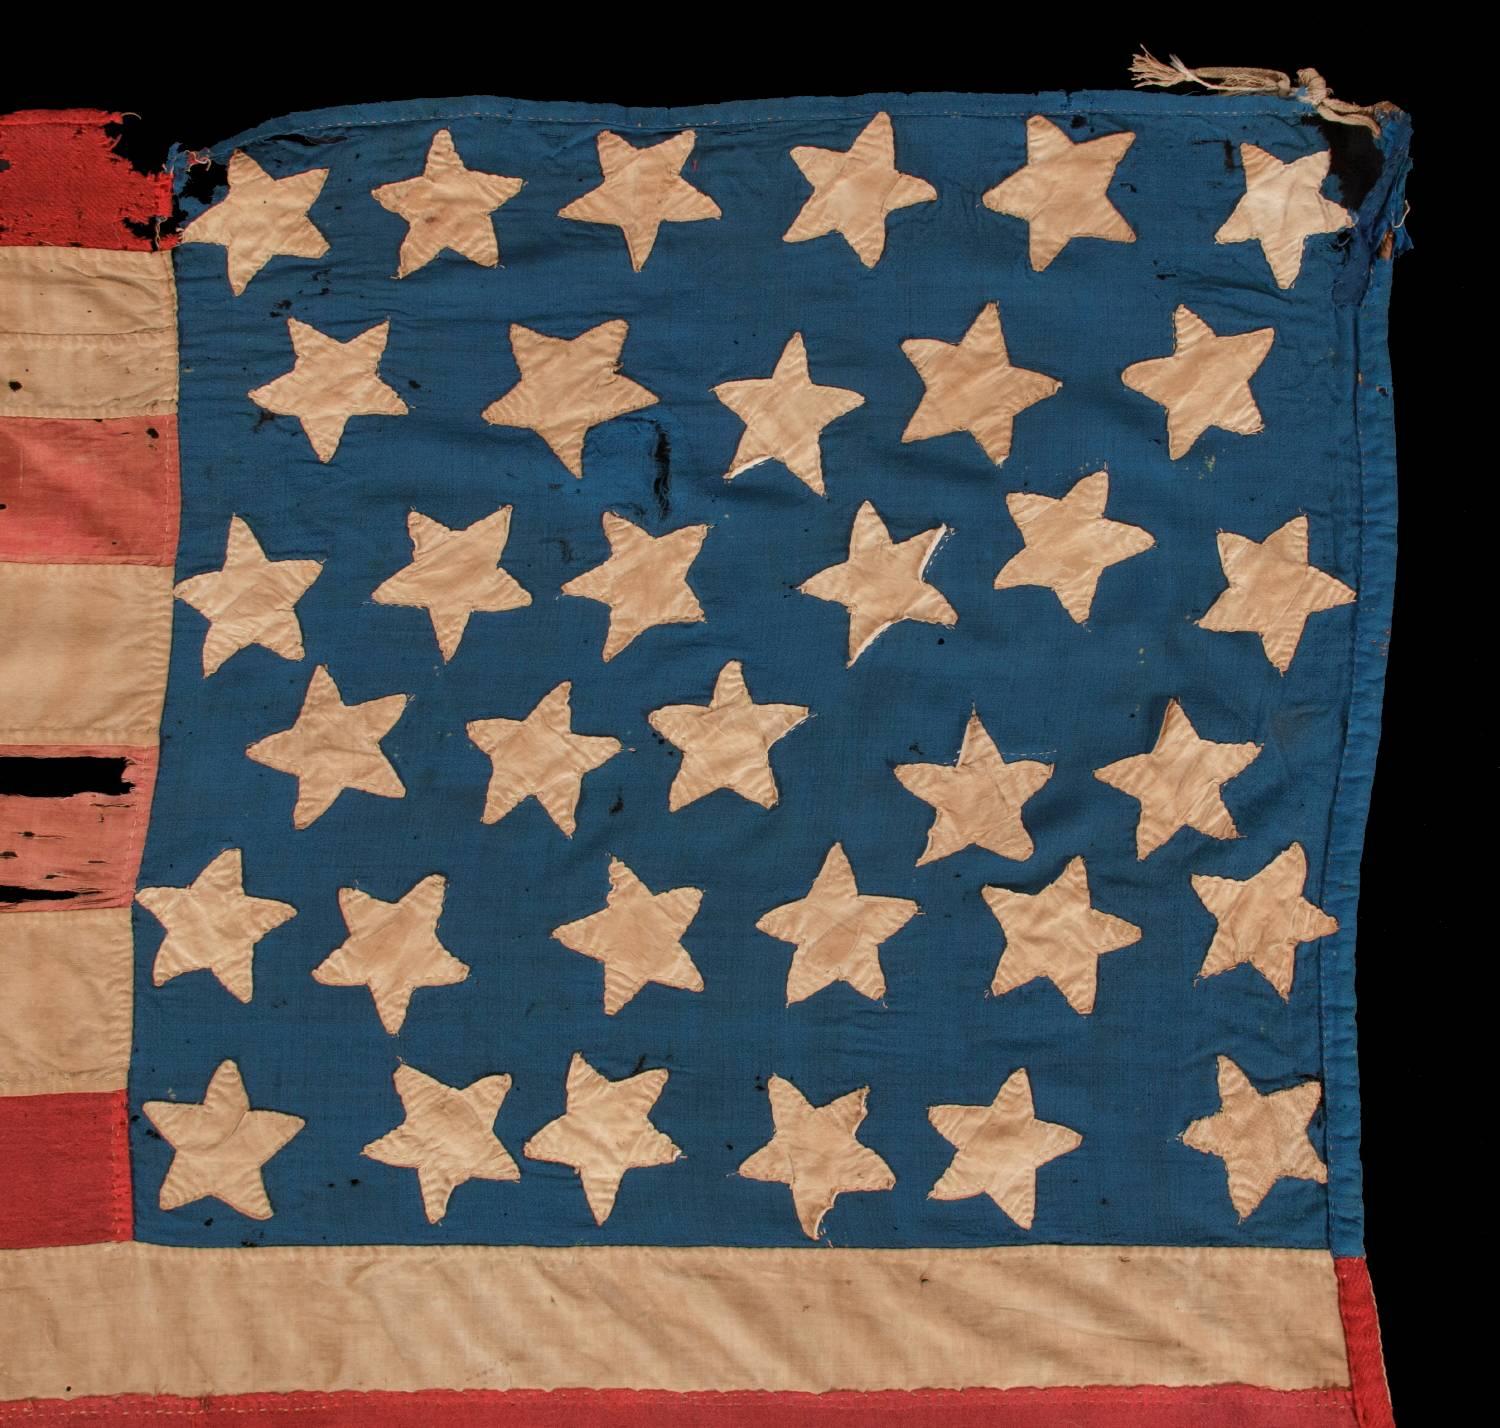 Mid-19th Century 34 Star, Hand-Sewn, Homemade Antique American Flag of the Civil War Period